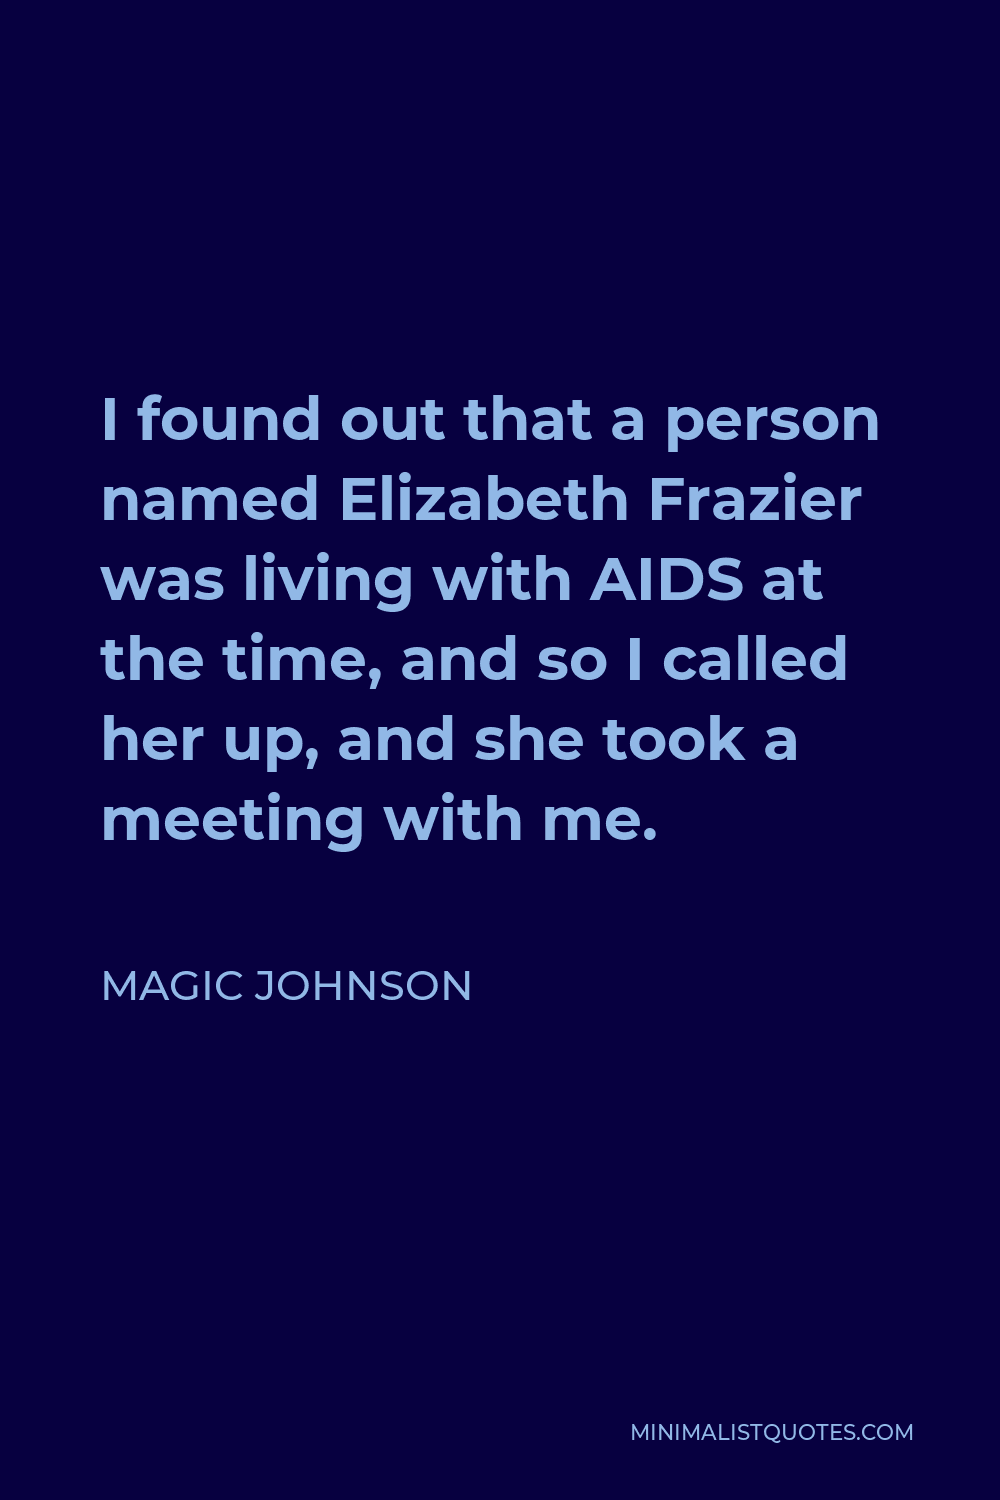 Magic Johnson Quote - I found out that a person named Elizabeth Frazier was living with AIDS at the time, and so I called her up, and she took a meeting with me.